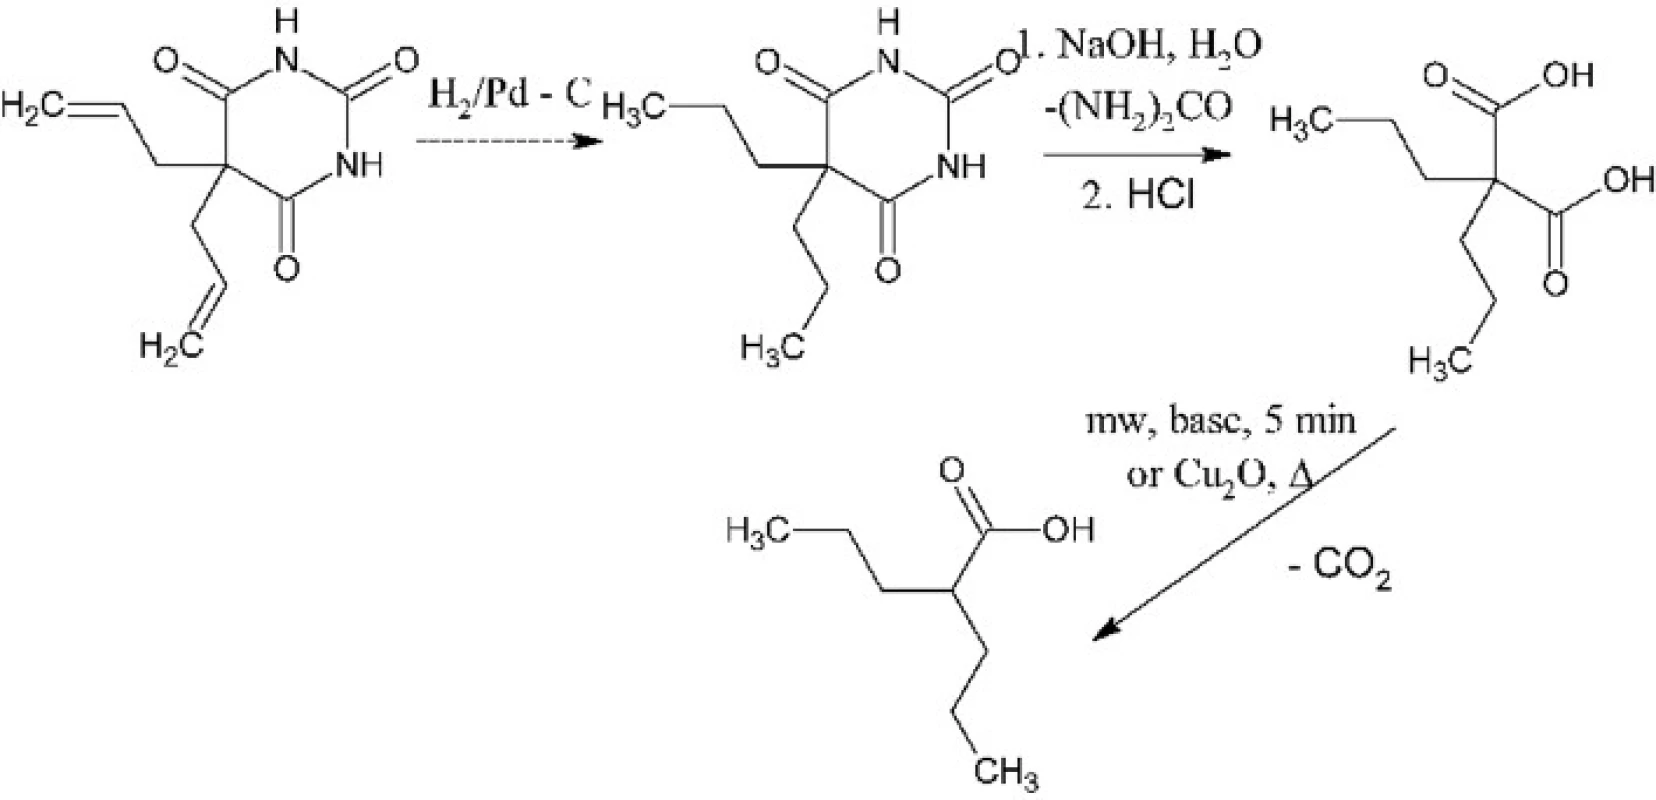 The overall scheme of synthesis of valproic acid from 5,5-dipropylbarbituric acid (or from allobarbital)